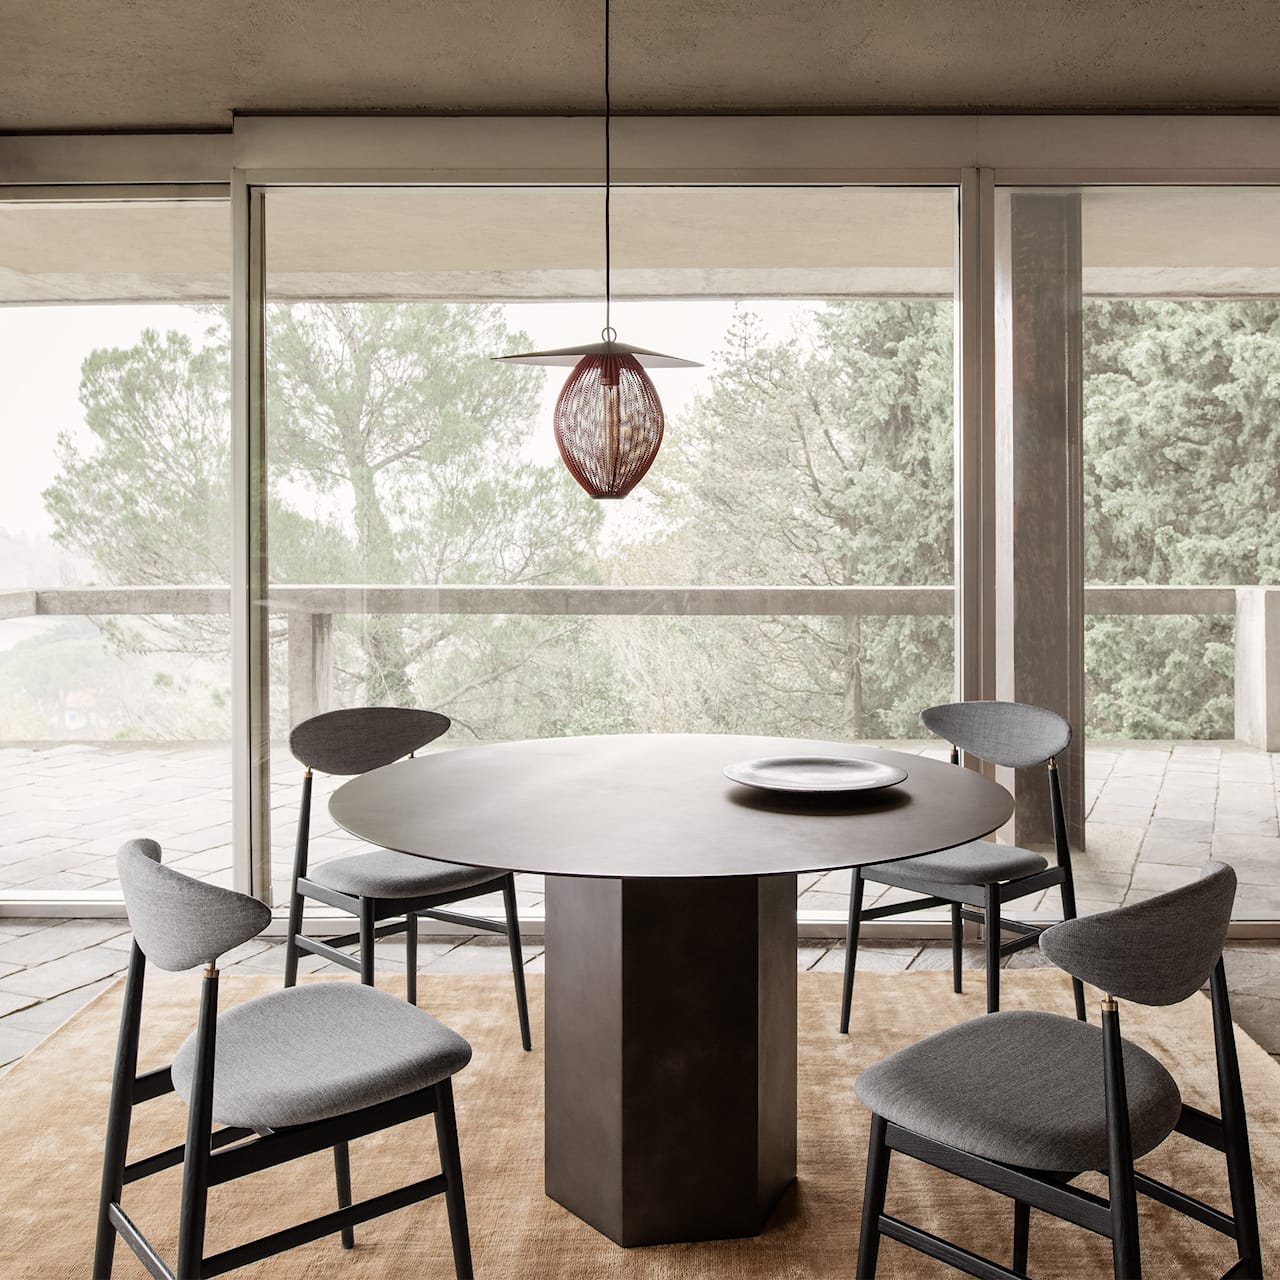 Epic Steel Dining Table Ø130